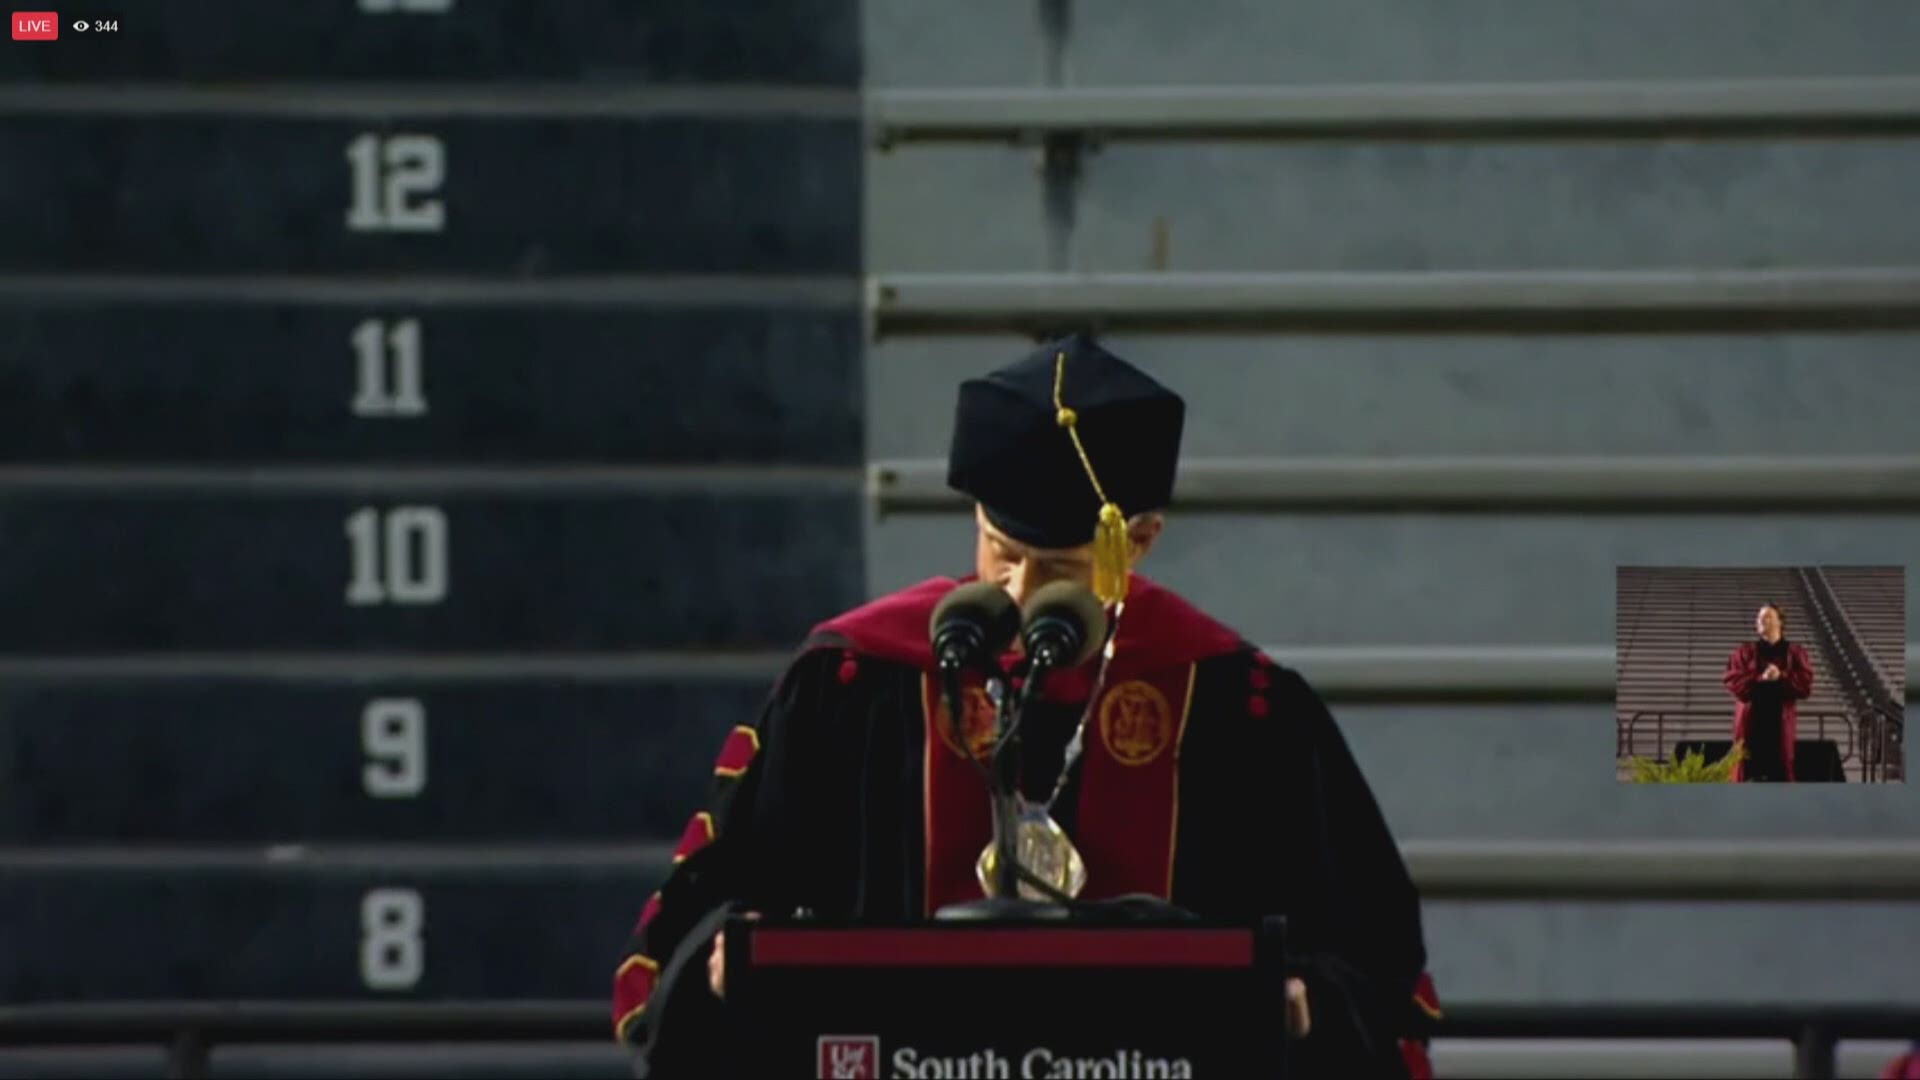 At the end of the USC graduation ceremony at Williams Brice stadium on Friday night, president Caslen makes a faux pas.